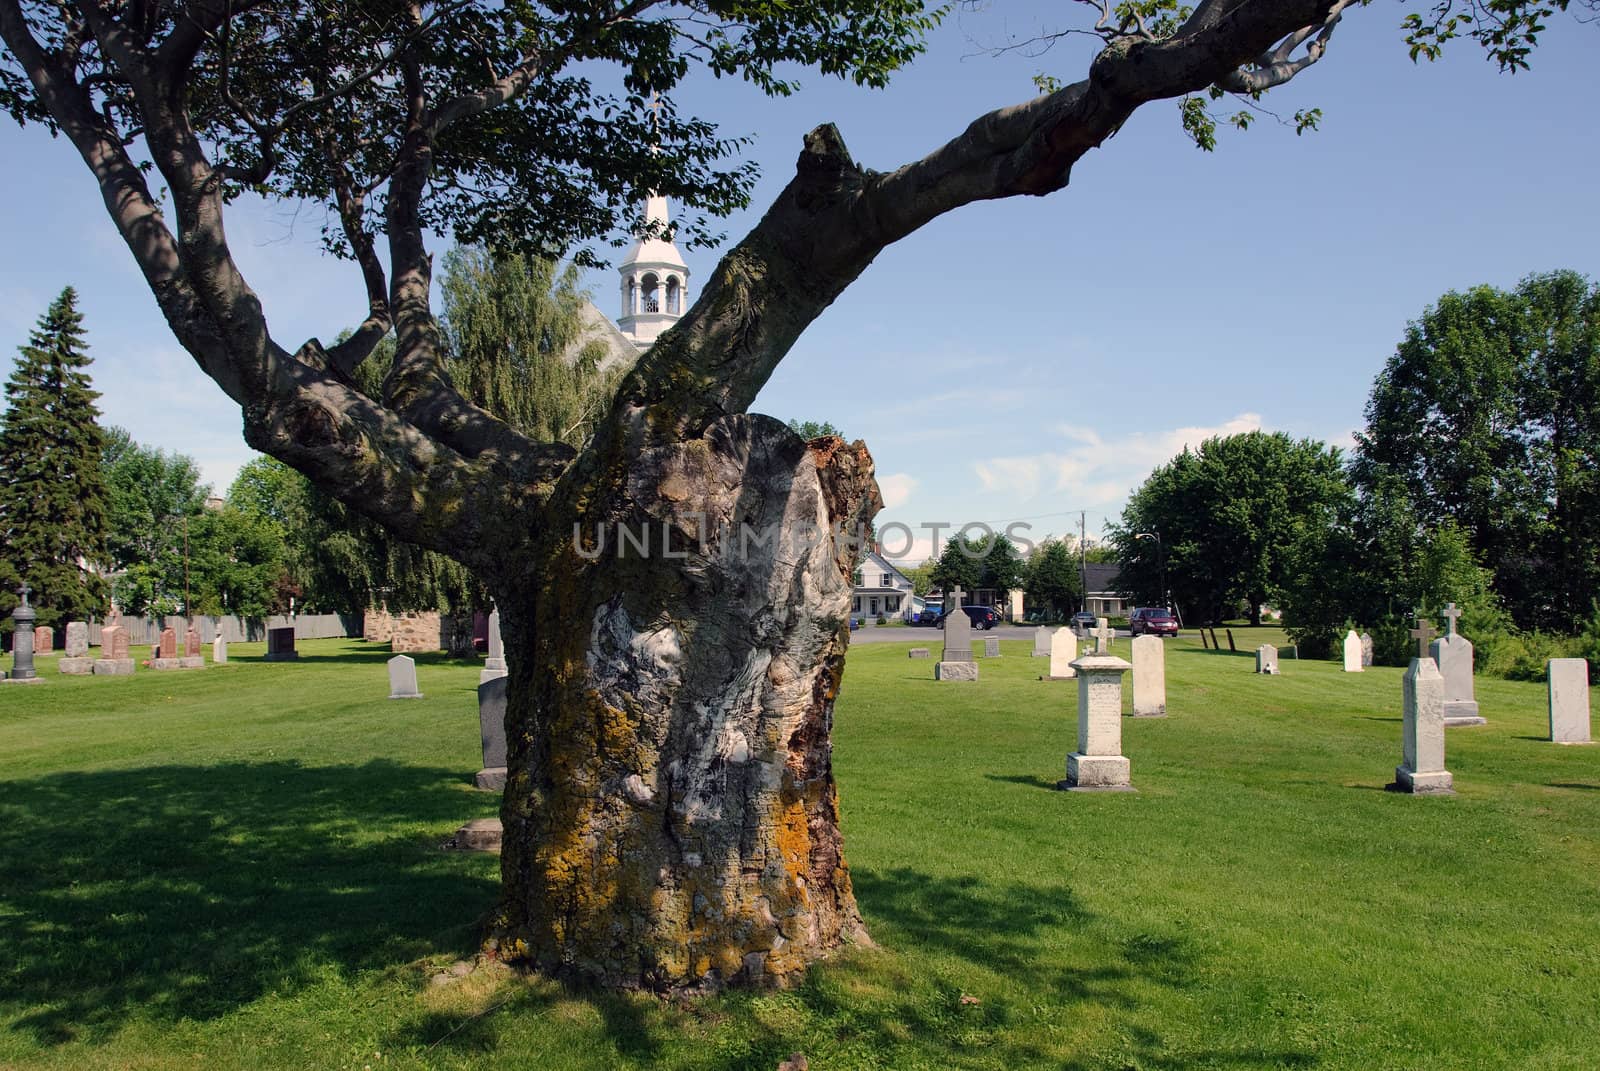 A very old tree in the middle of a cemetery